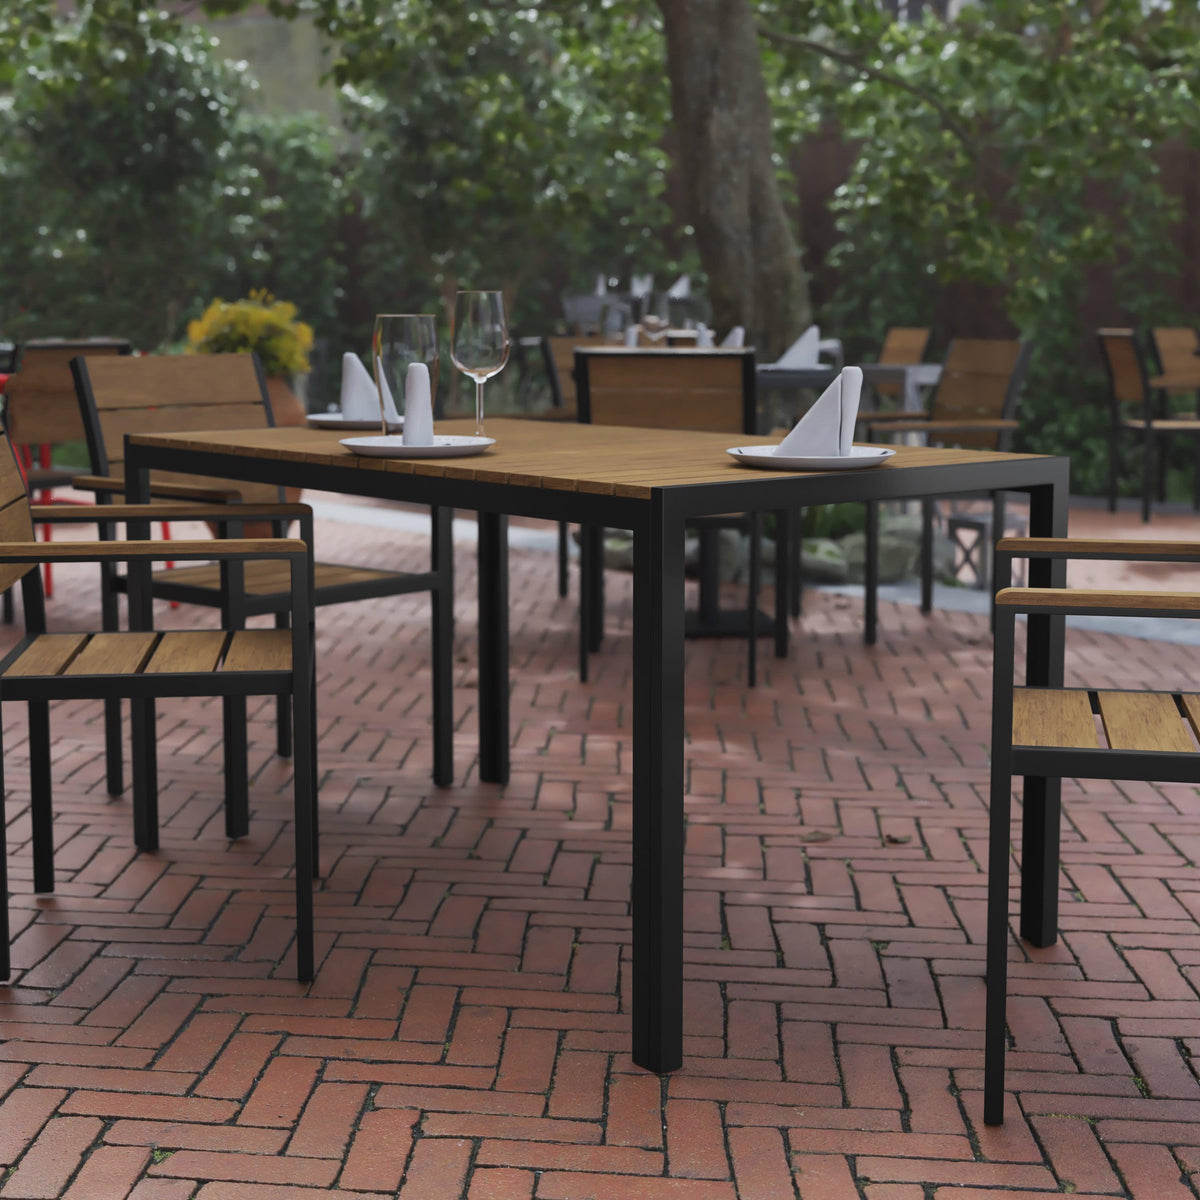 Natural |#| Commercial 55 x 31 Faux Teak Outdoor Patio Table - Natural/Gray